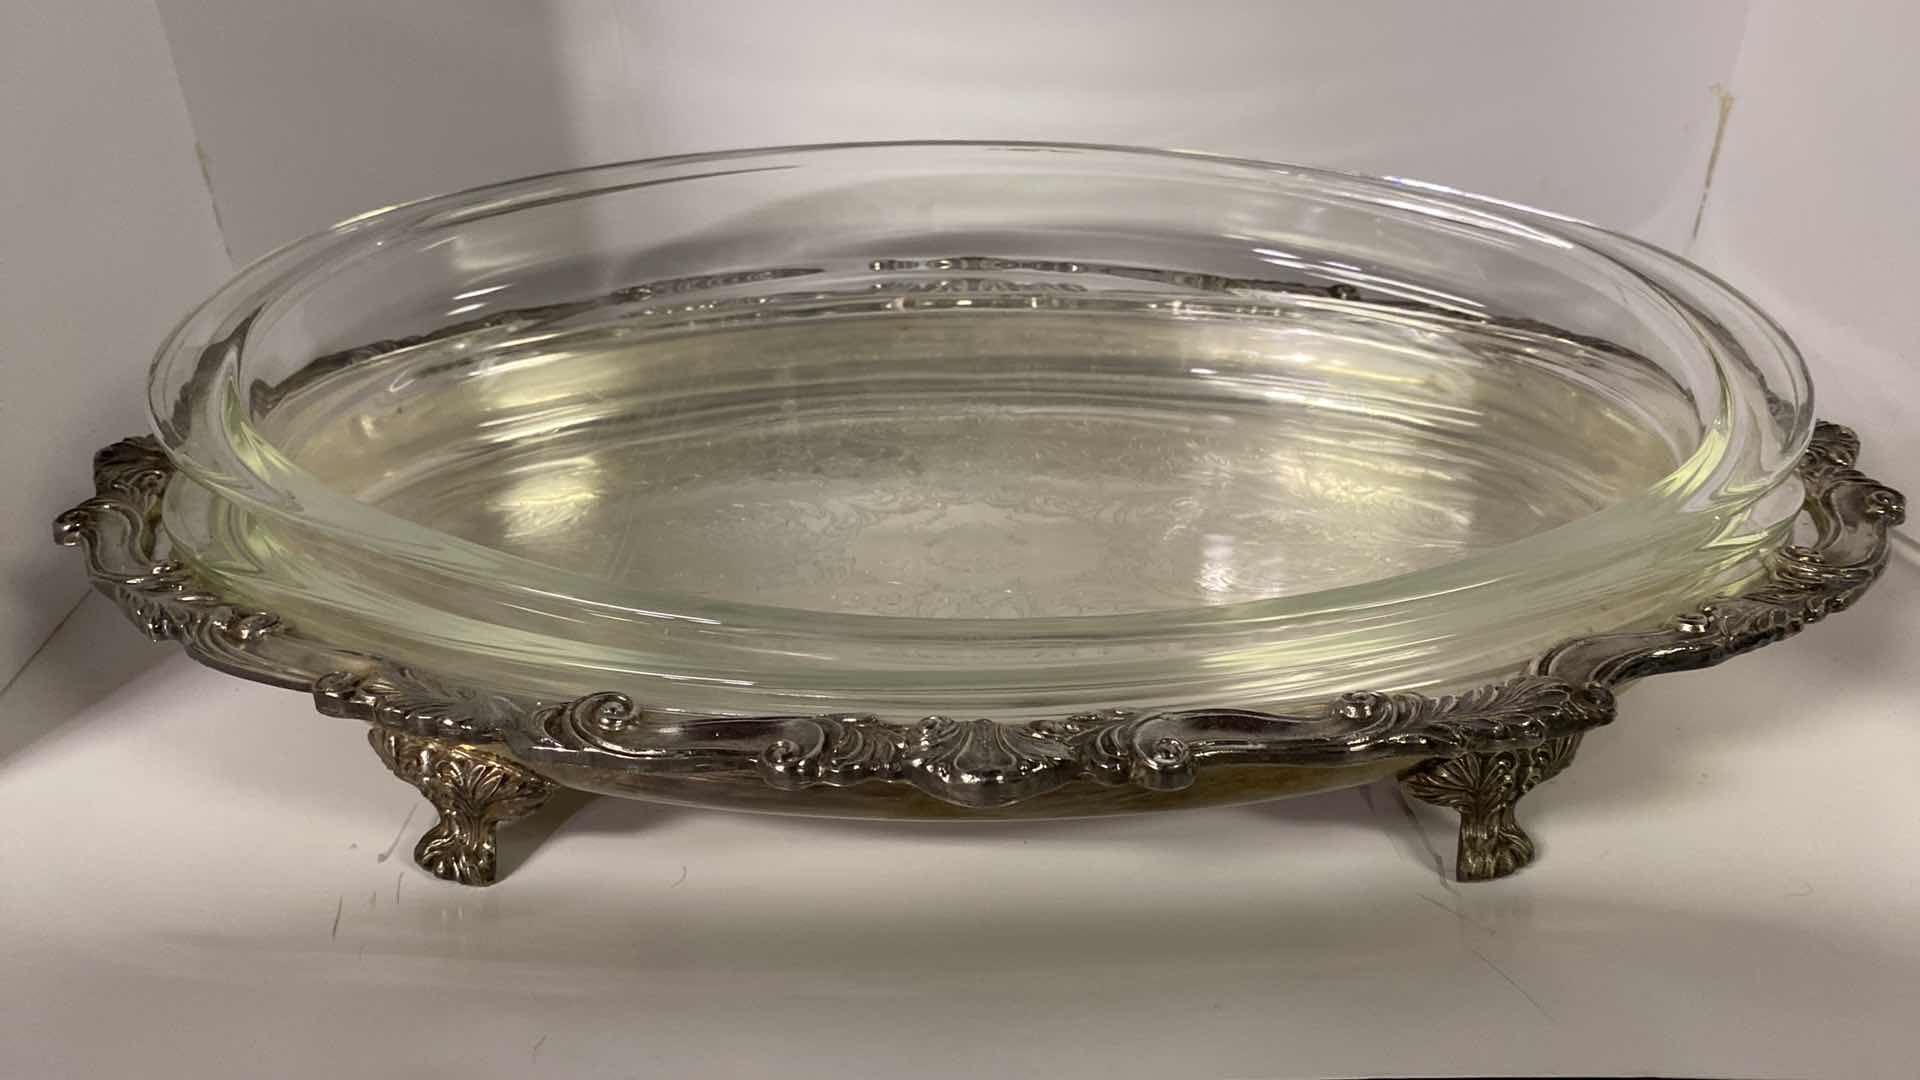 Photo 1 of SILVER PLATED SERVEWARE WITH 2 PYREX INSERTS 20 1/2” x 13 1/2”